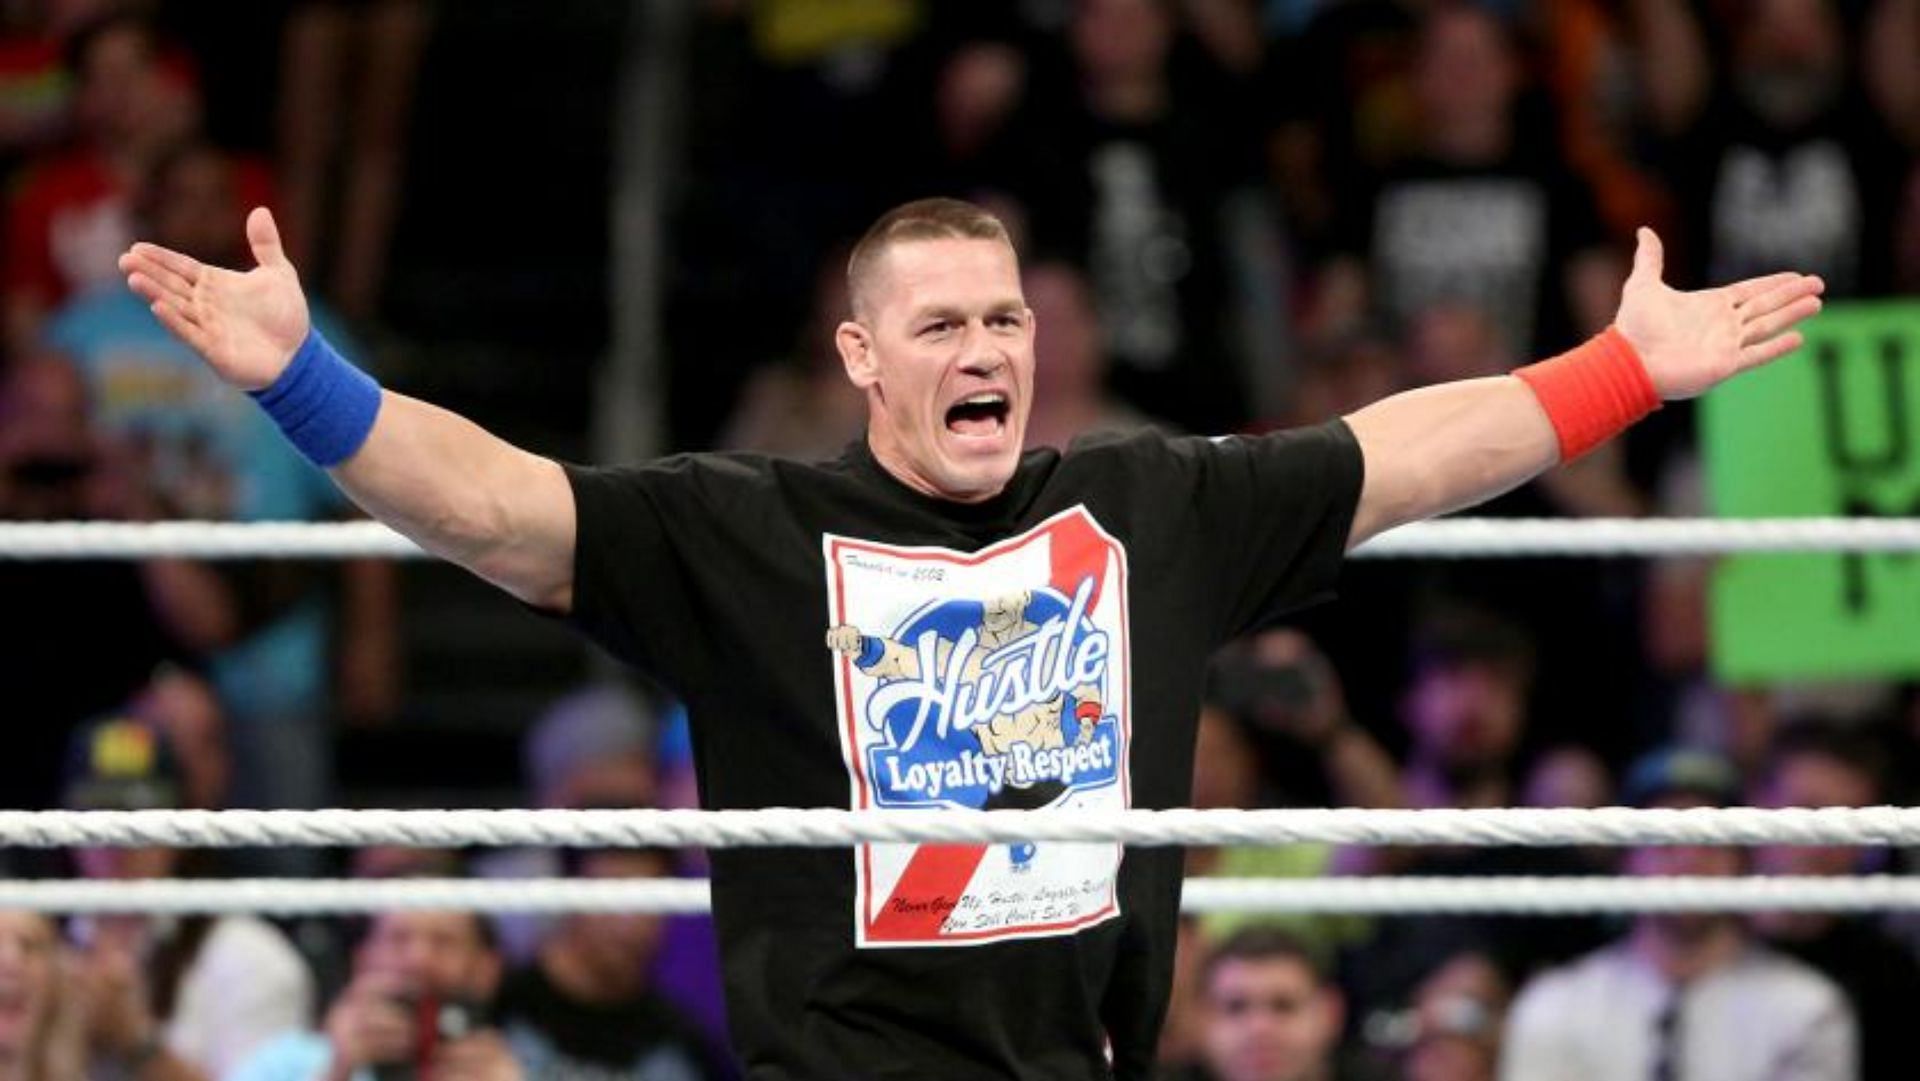 John Cena is a 16-time world champion in WWE